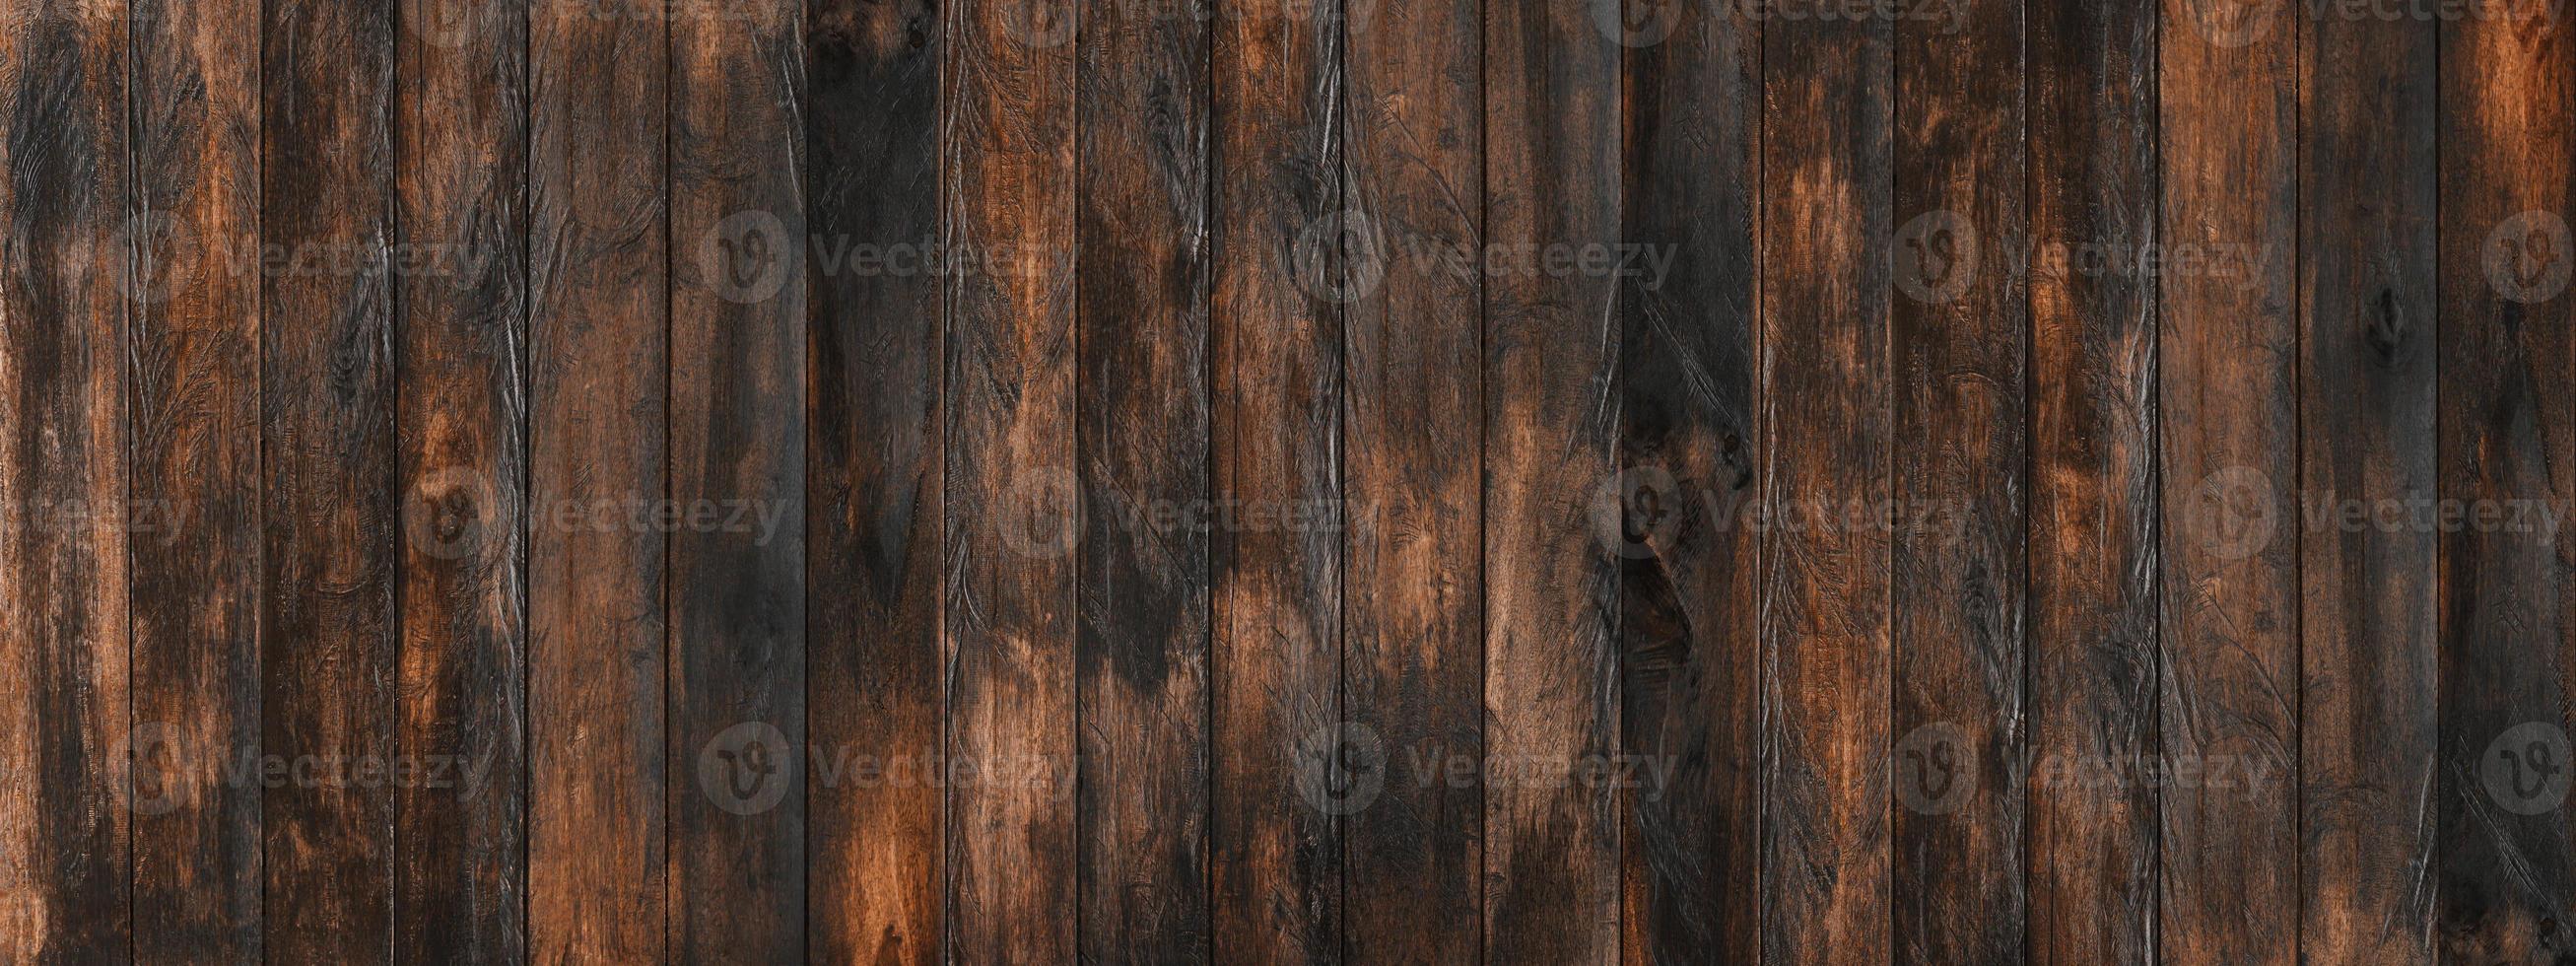 Old wood texture for pattern background. House, shop and cafe design backdrop. photo